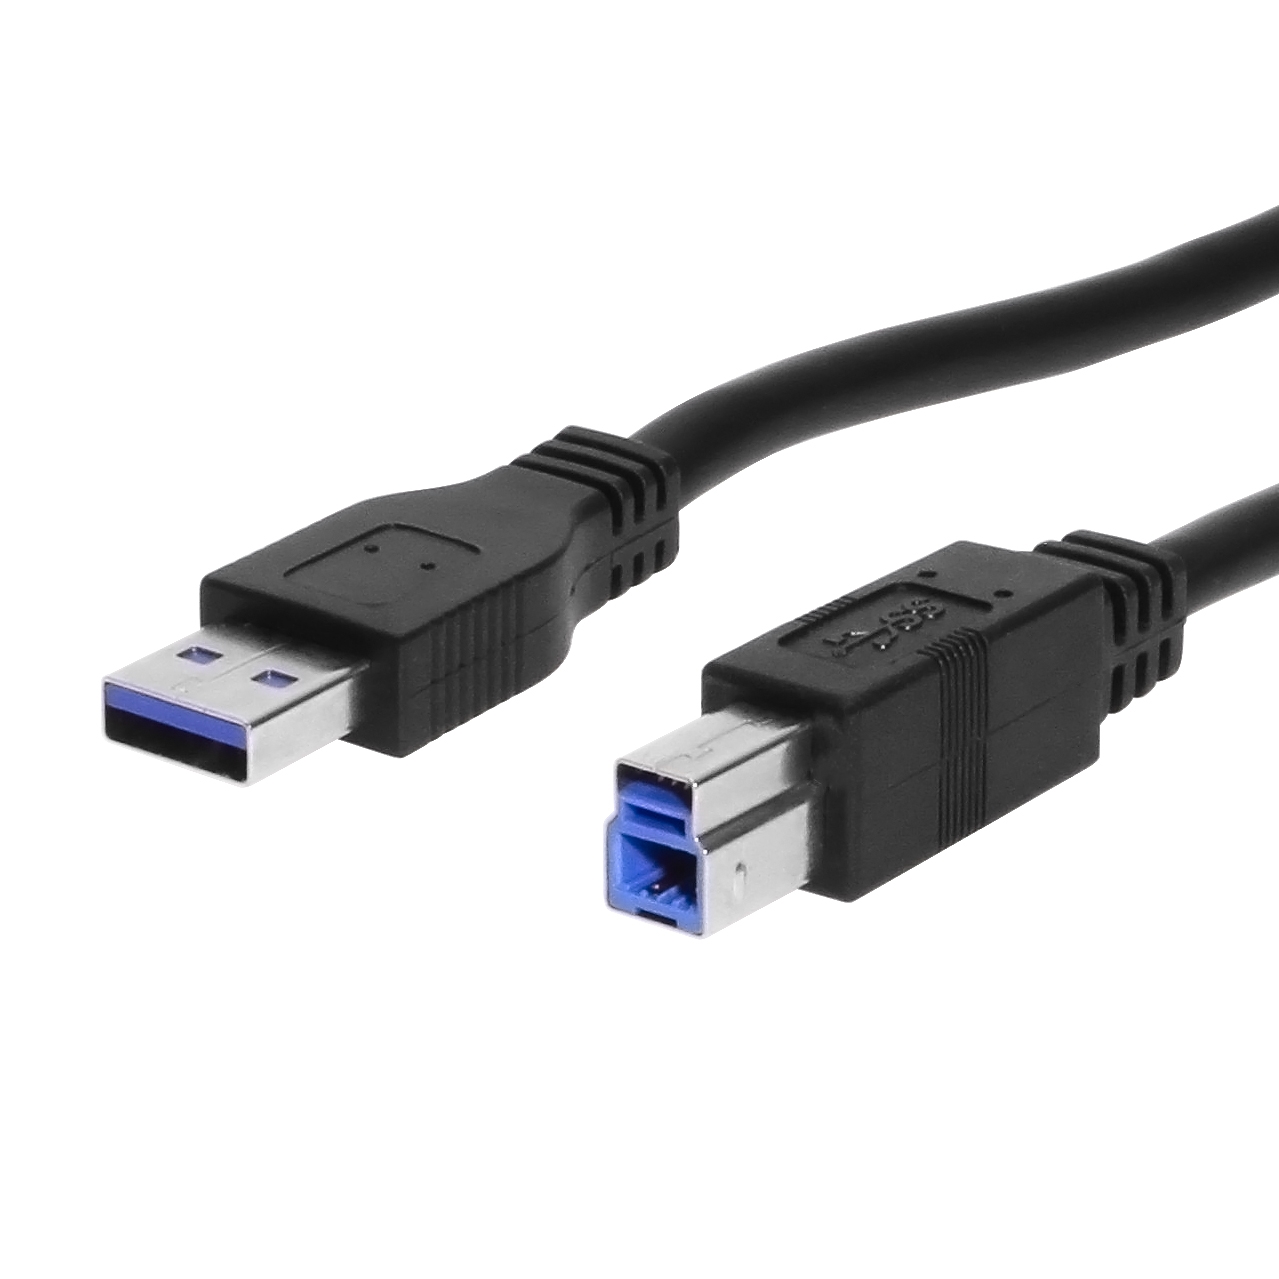 6ft. A to USB 3.0 Super High Speed Device Cable Black